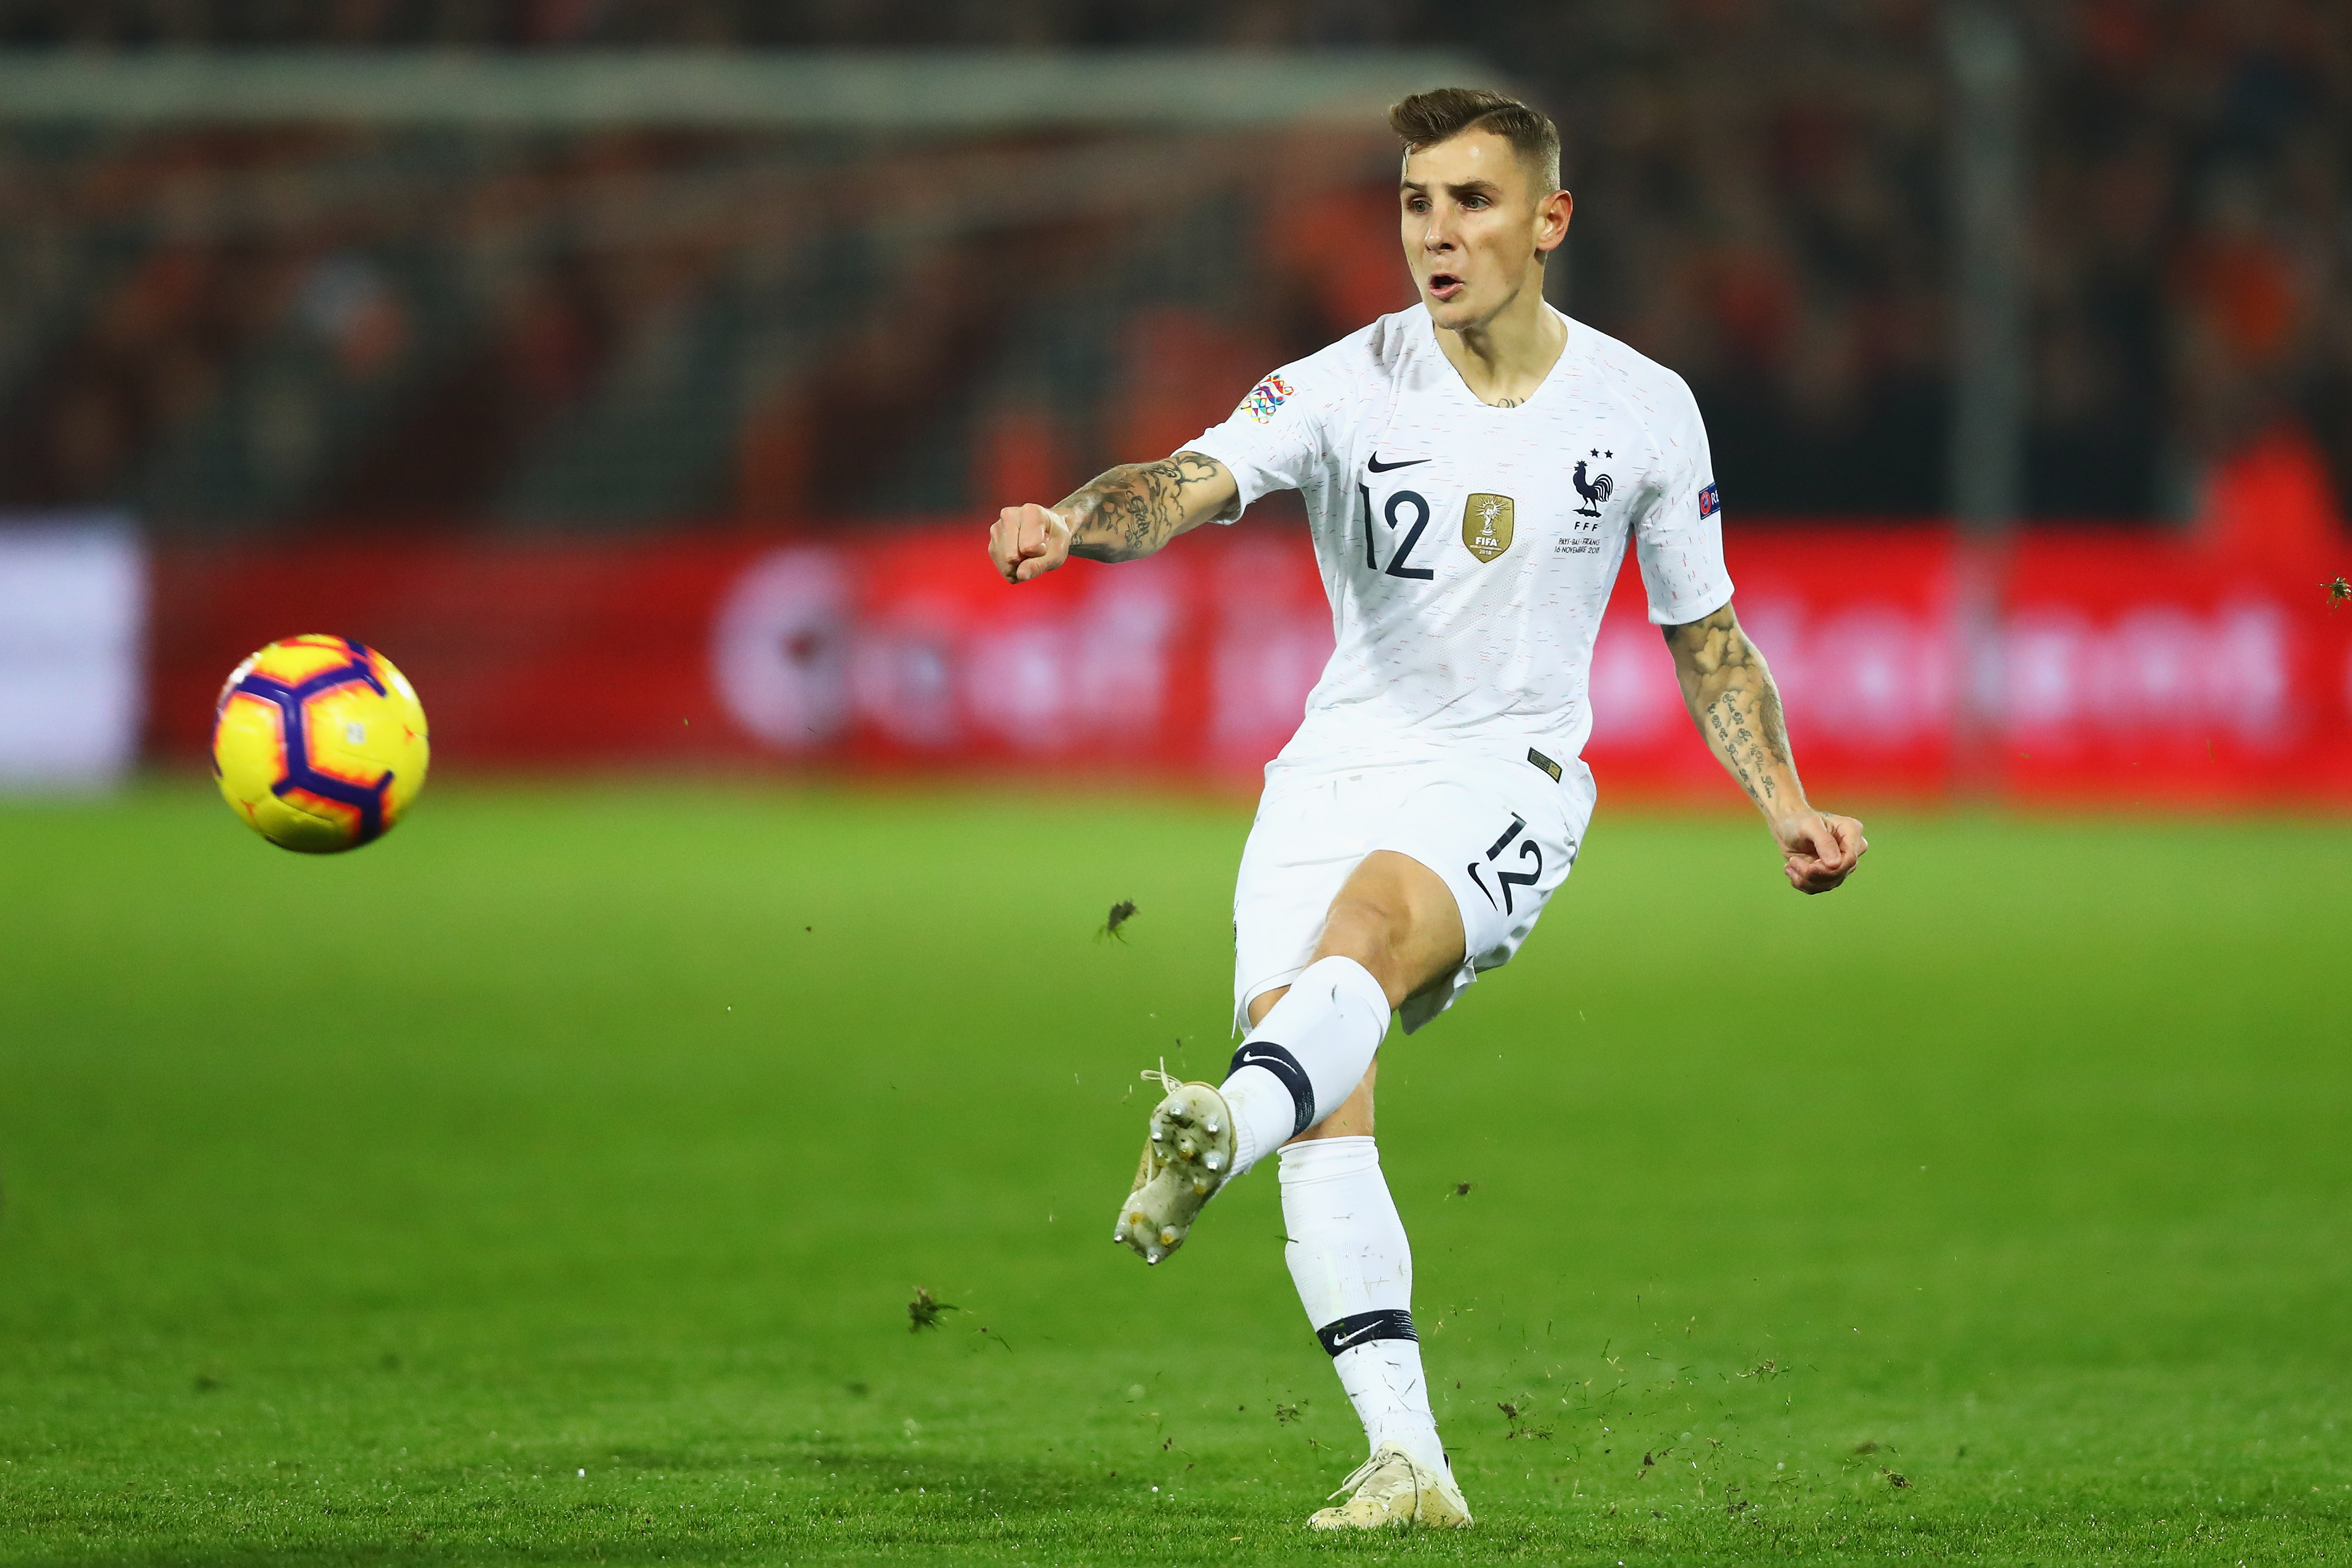 Digne to don the Whites of Real Madrid? (Photo by Dean Mouhtaropoulos/Getty Images)